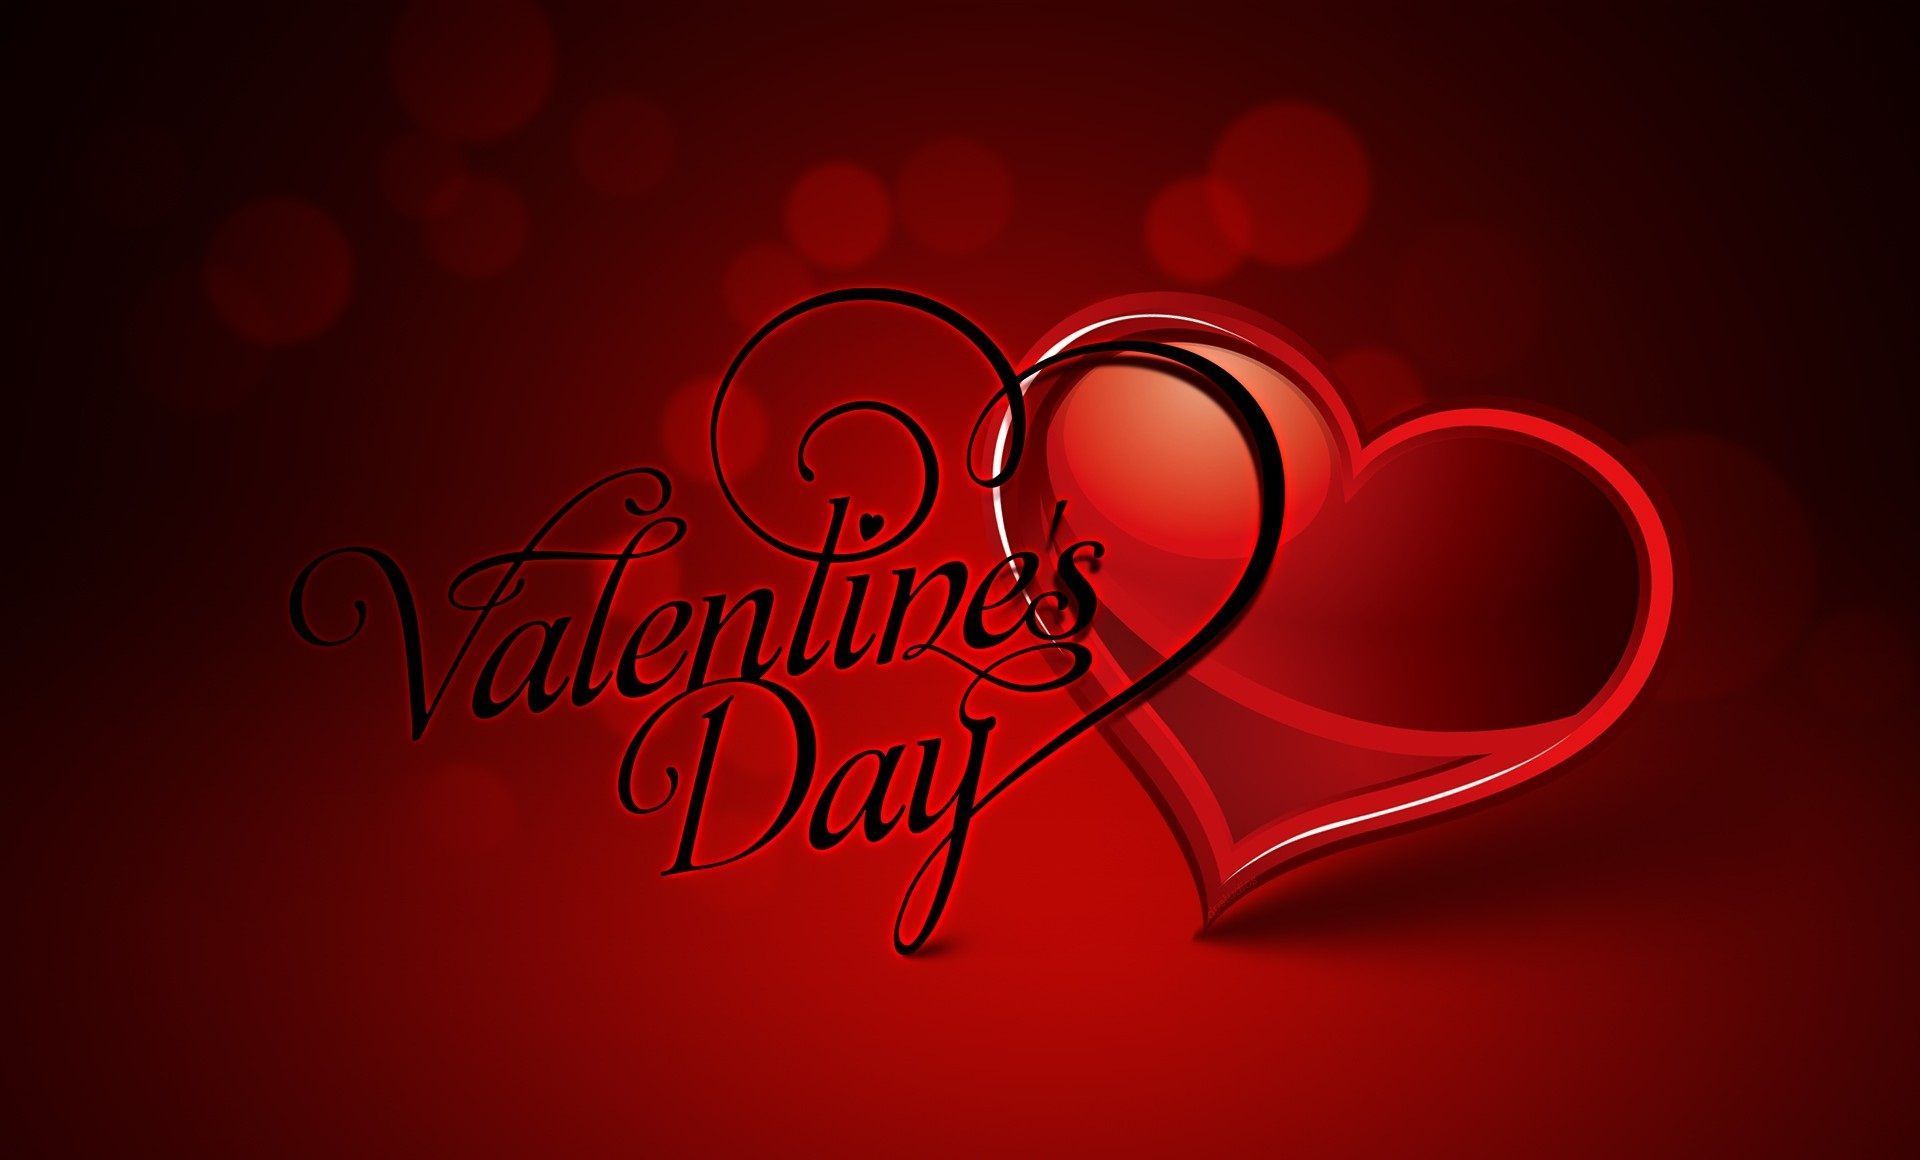 Valentines Day Wallpaper HD Free Download | Wallpapers ...